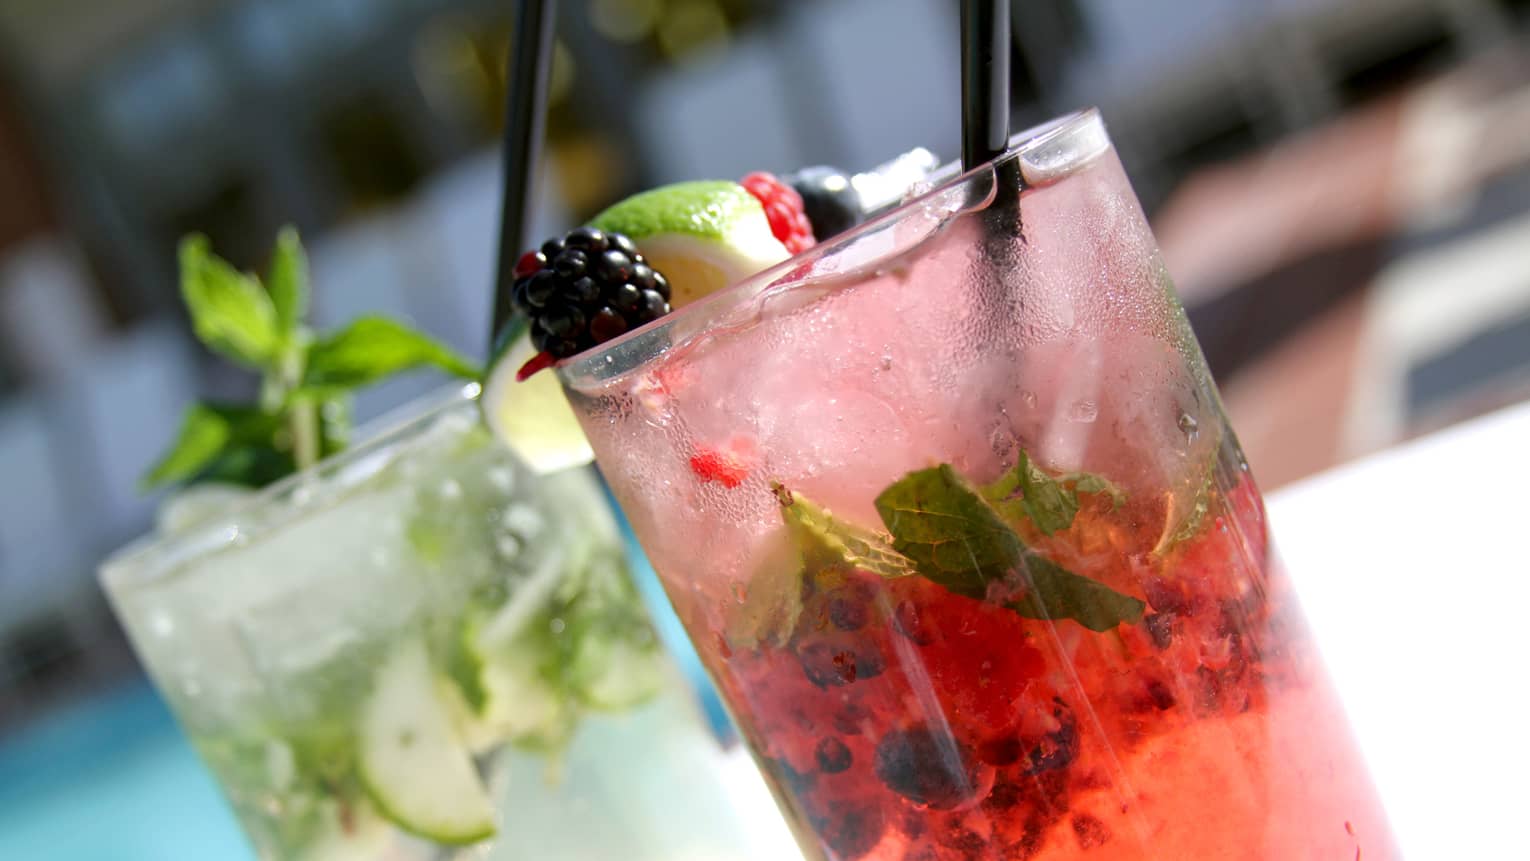 Two different mojitos: one pink garnished with fruit, one with cucumber and mint